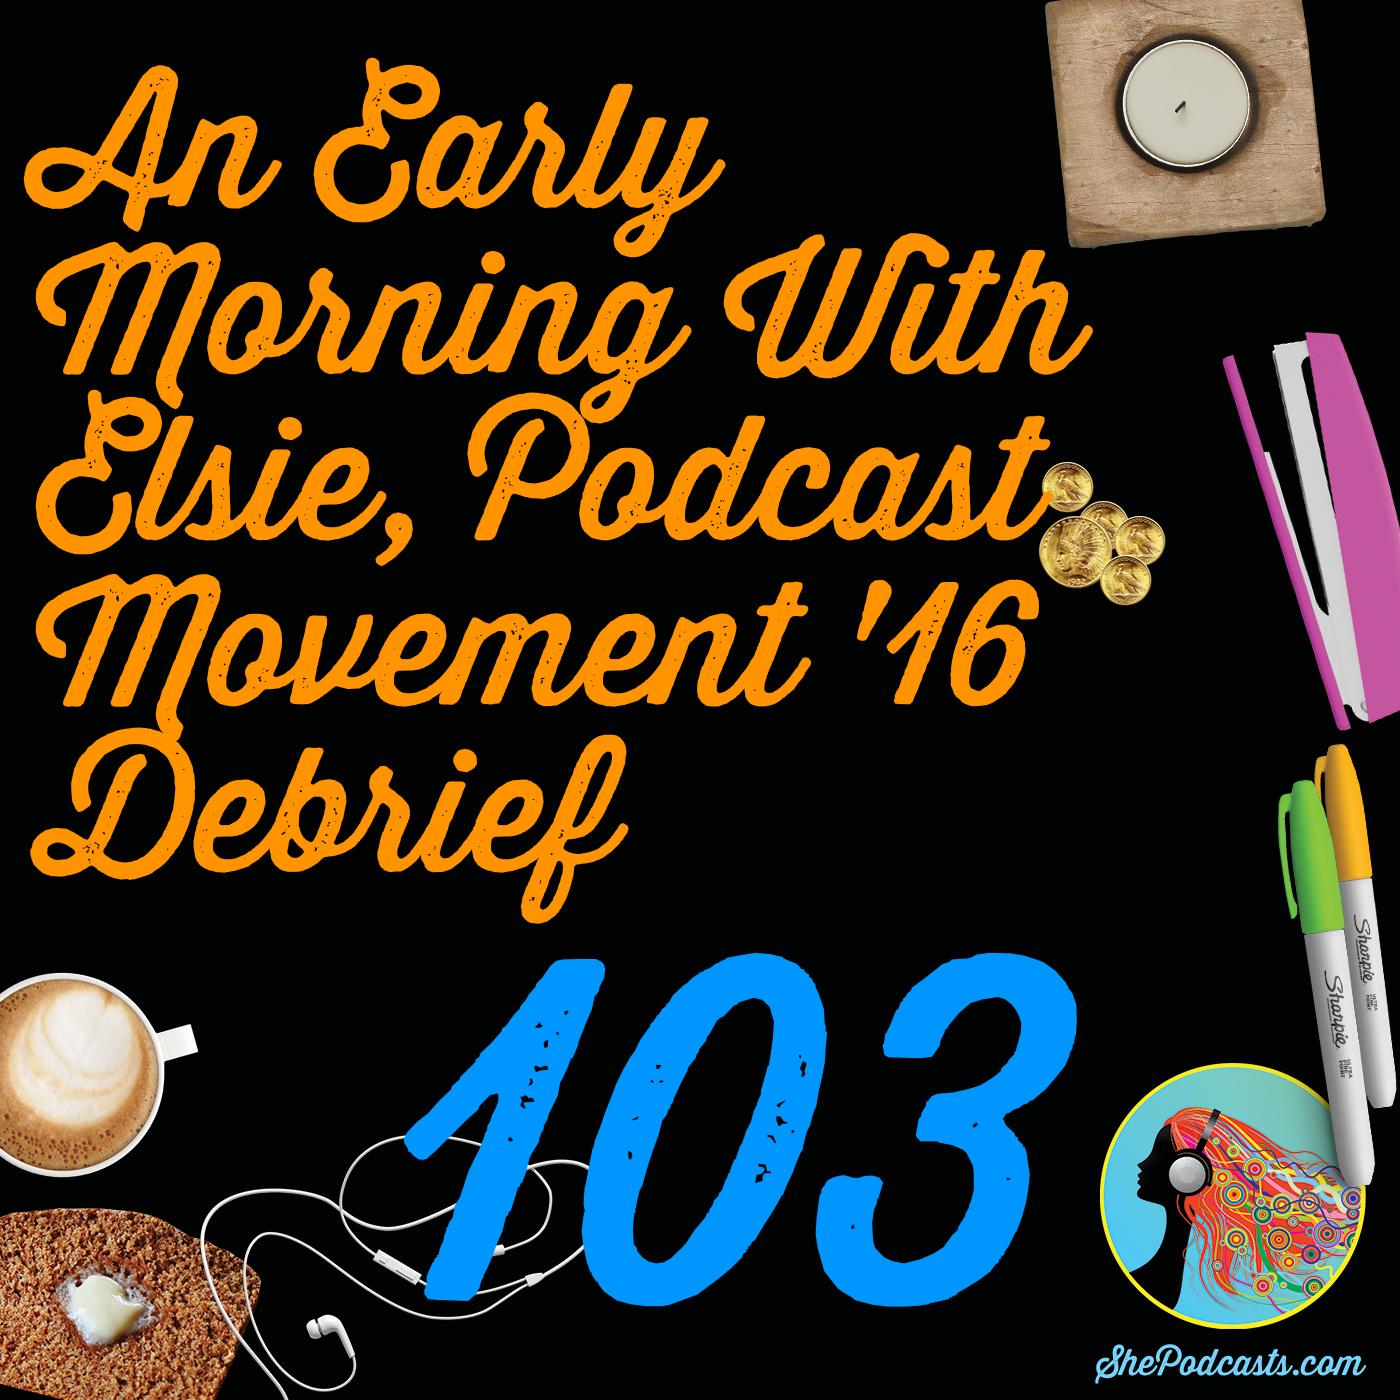 103 An Early Morning With Elsie Podcast Movement 2016 Debrief